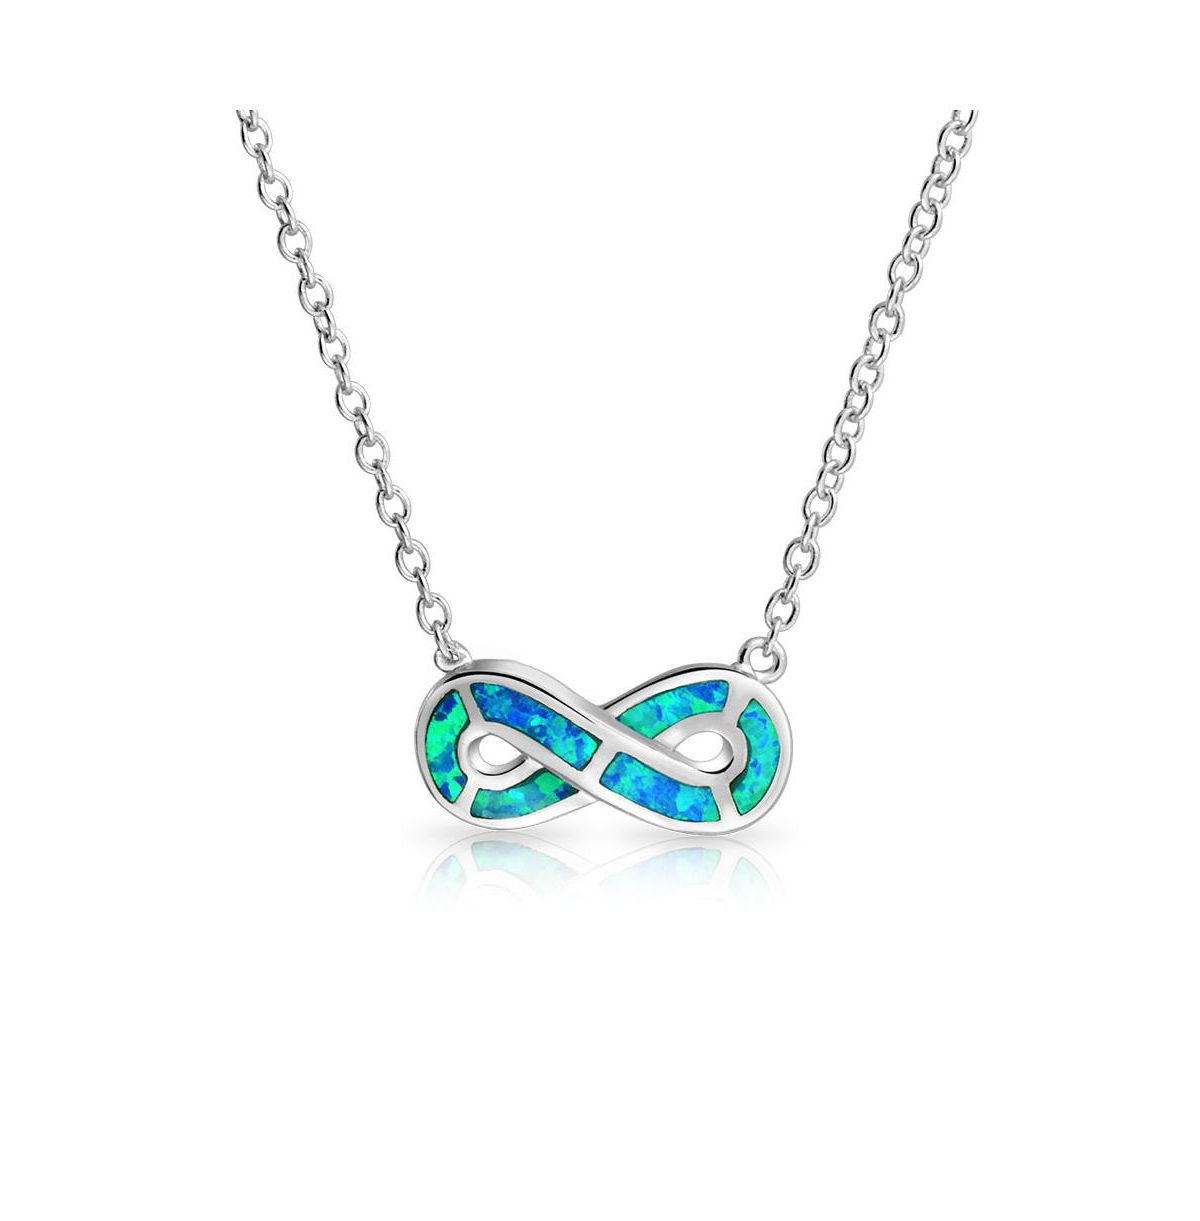 Forever Romantic Eternity Figure Eight Symbol Love Knot Gemstone Blue Created Opal Infinity Pendant Necklace For Women Girlfriend .925 S